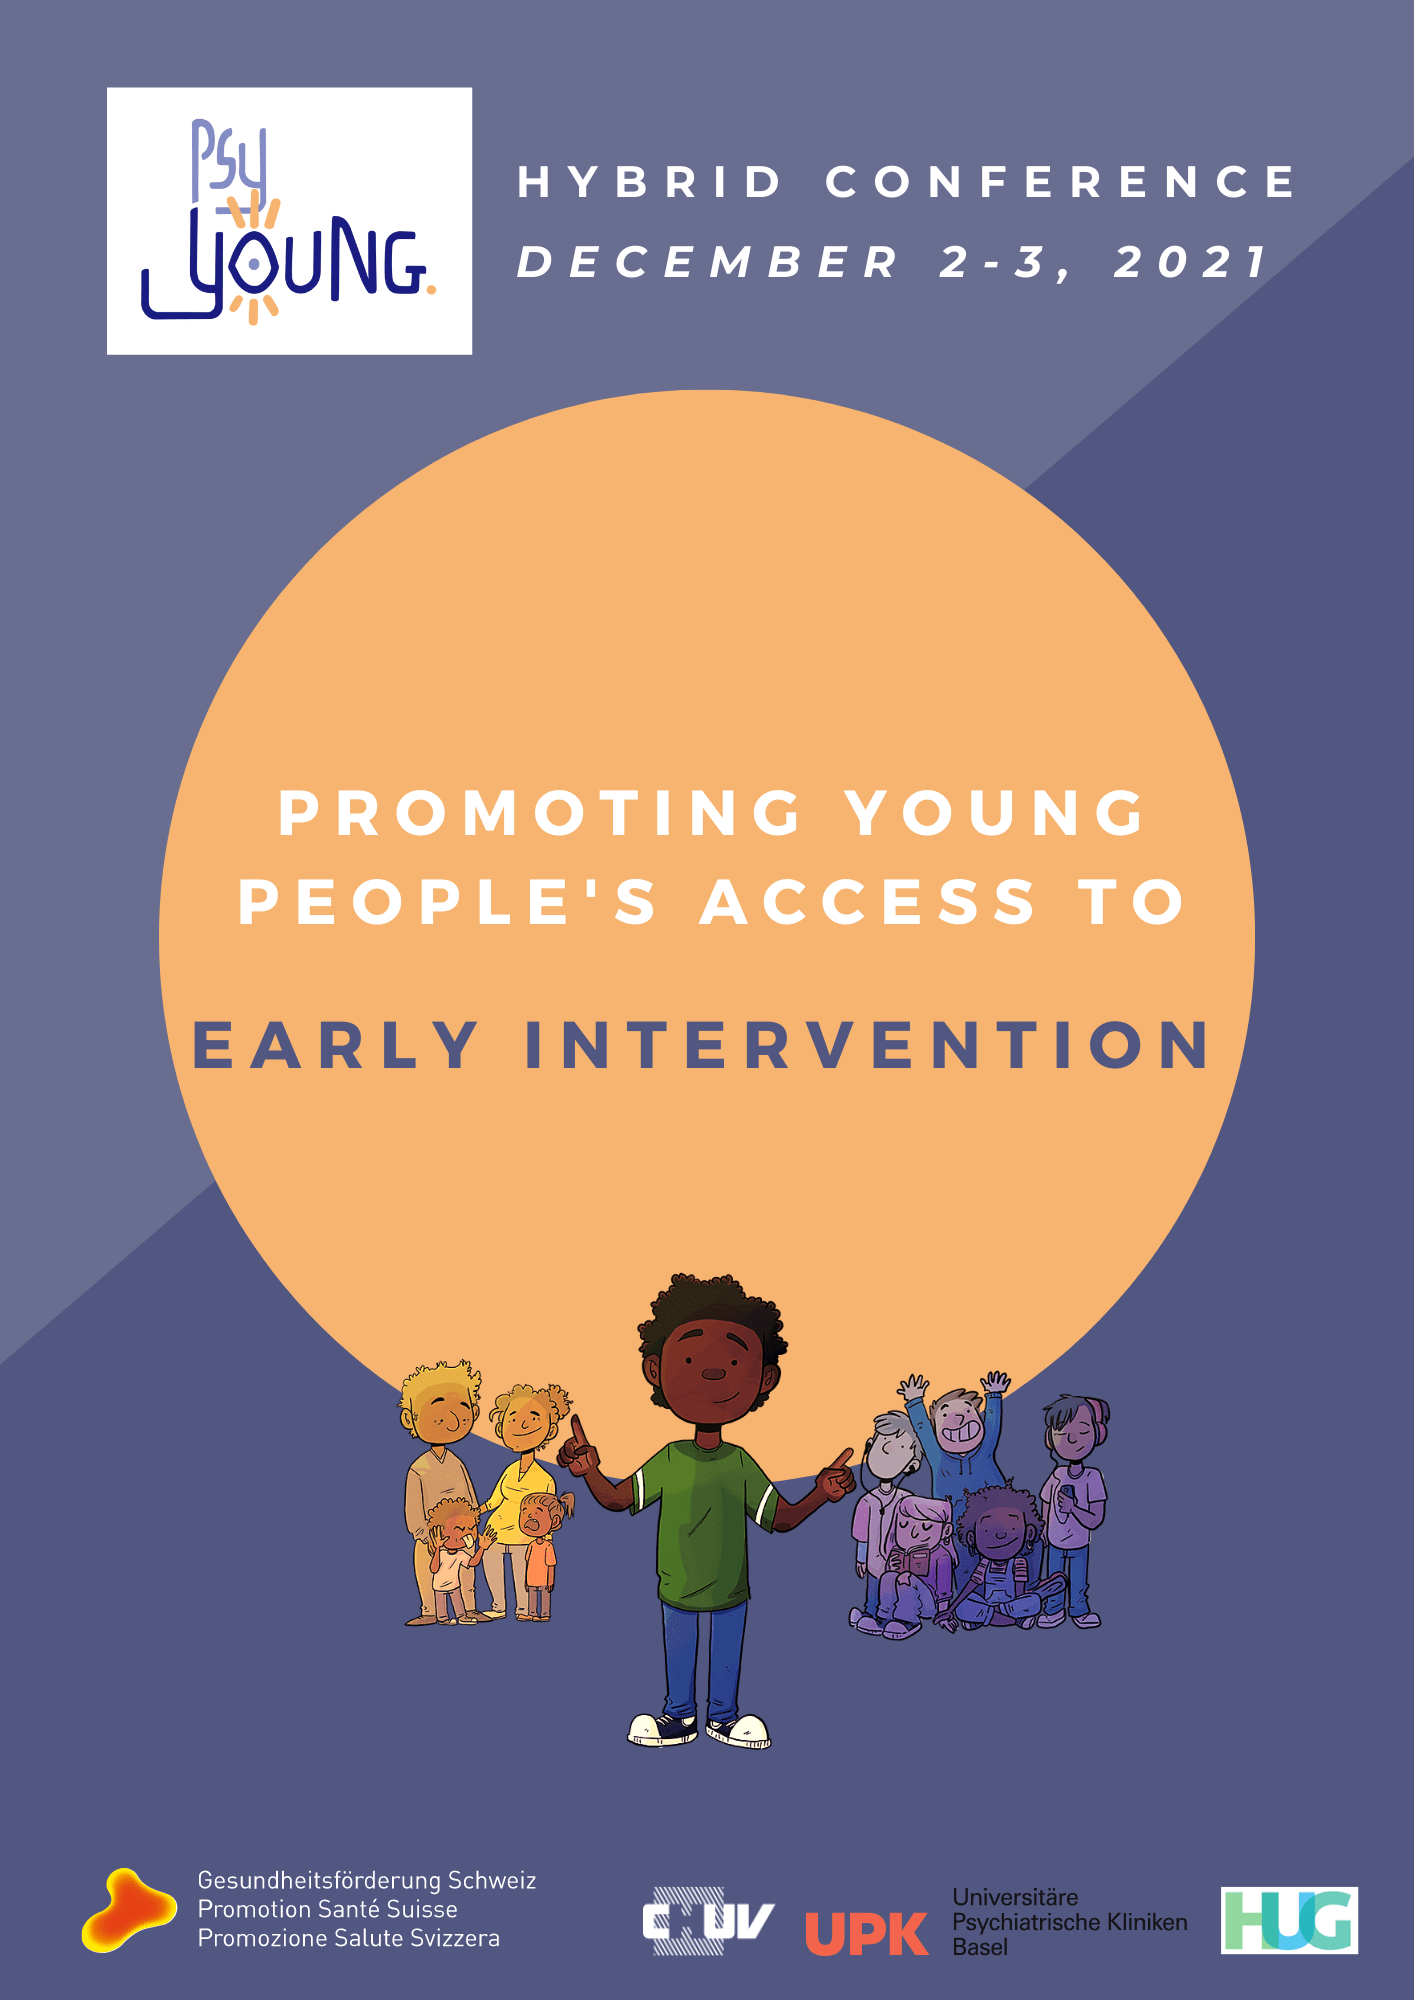 Hybrid conference
December 2-3, 2021
Promoting young people's access to early intervention